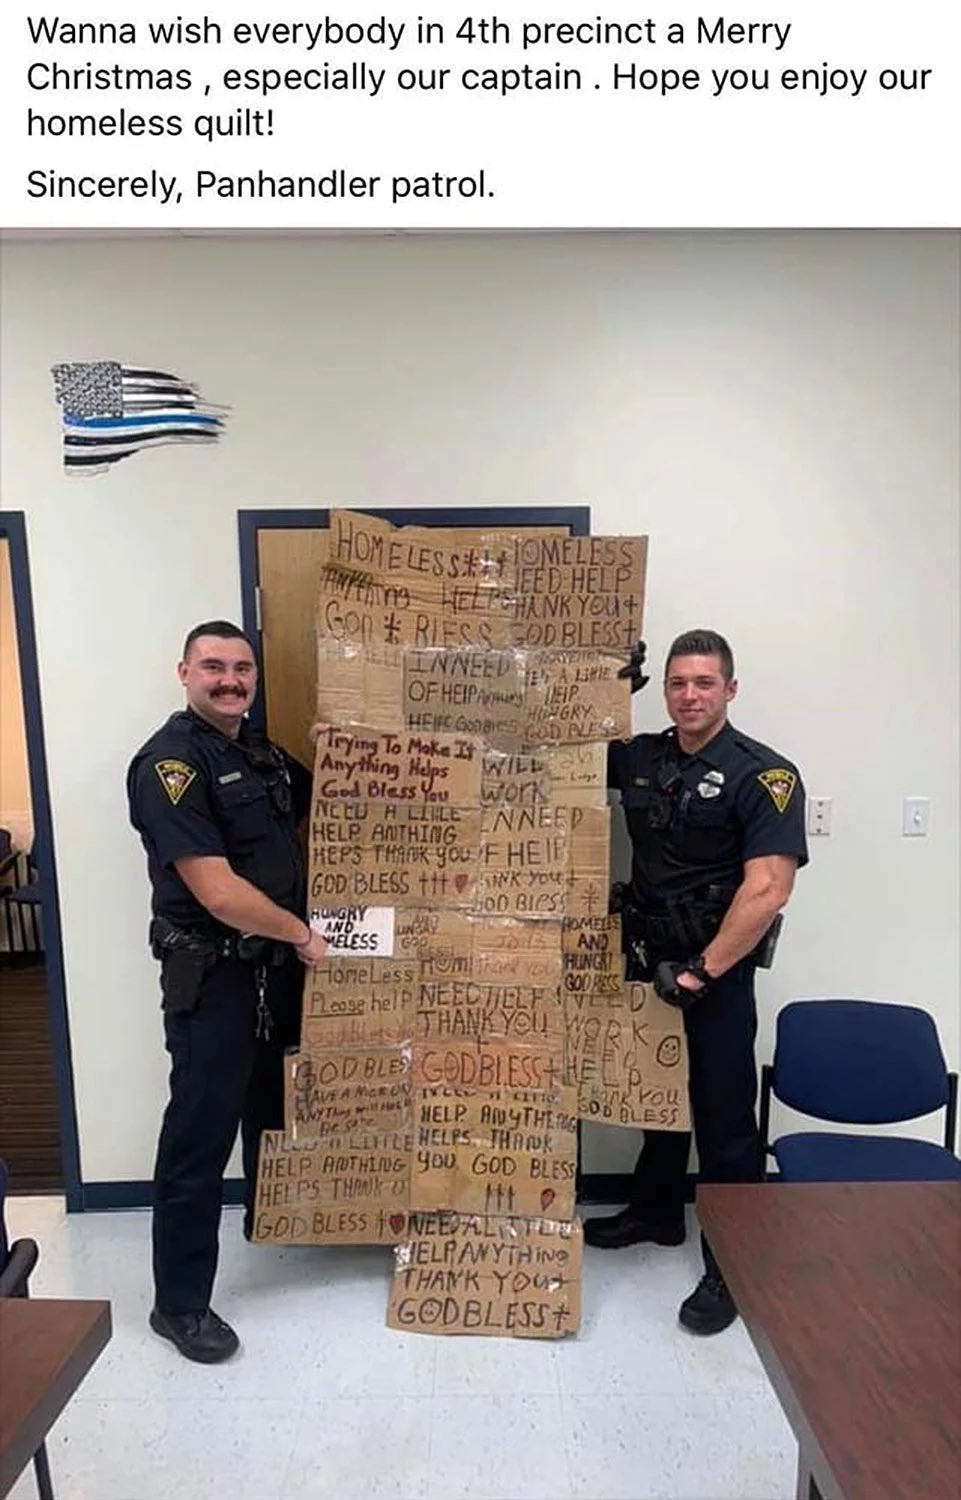 mobile police homeless quilt - Wanna wish everybody in 4th precinct a Merry Christmas, especially our captain. Hope you enjoy our homeless quilt! Sincerely, Panhandler patrol. Home Lessed Help Homeless Tank Hellhank You Gon Riess God Bless Inneeds Mes A S